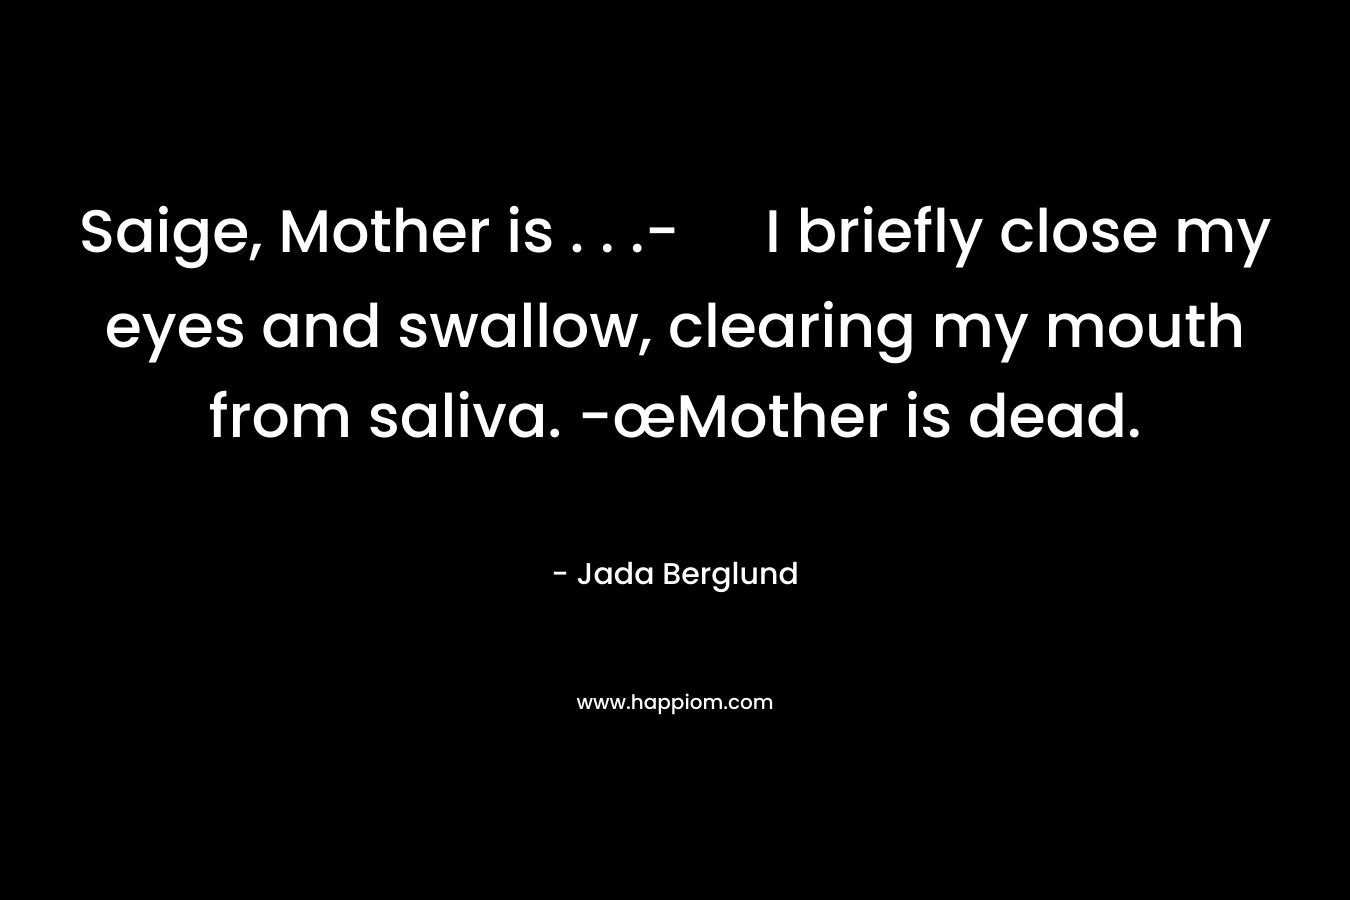 Saige, Mother is . . .- I briefly close my eyes and swallow, clearing my mouth from saliva. -œMother is dead.